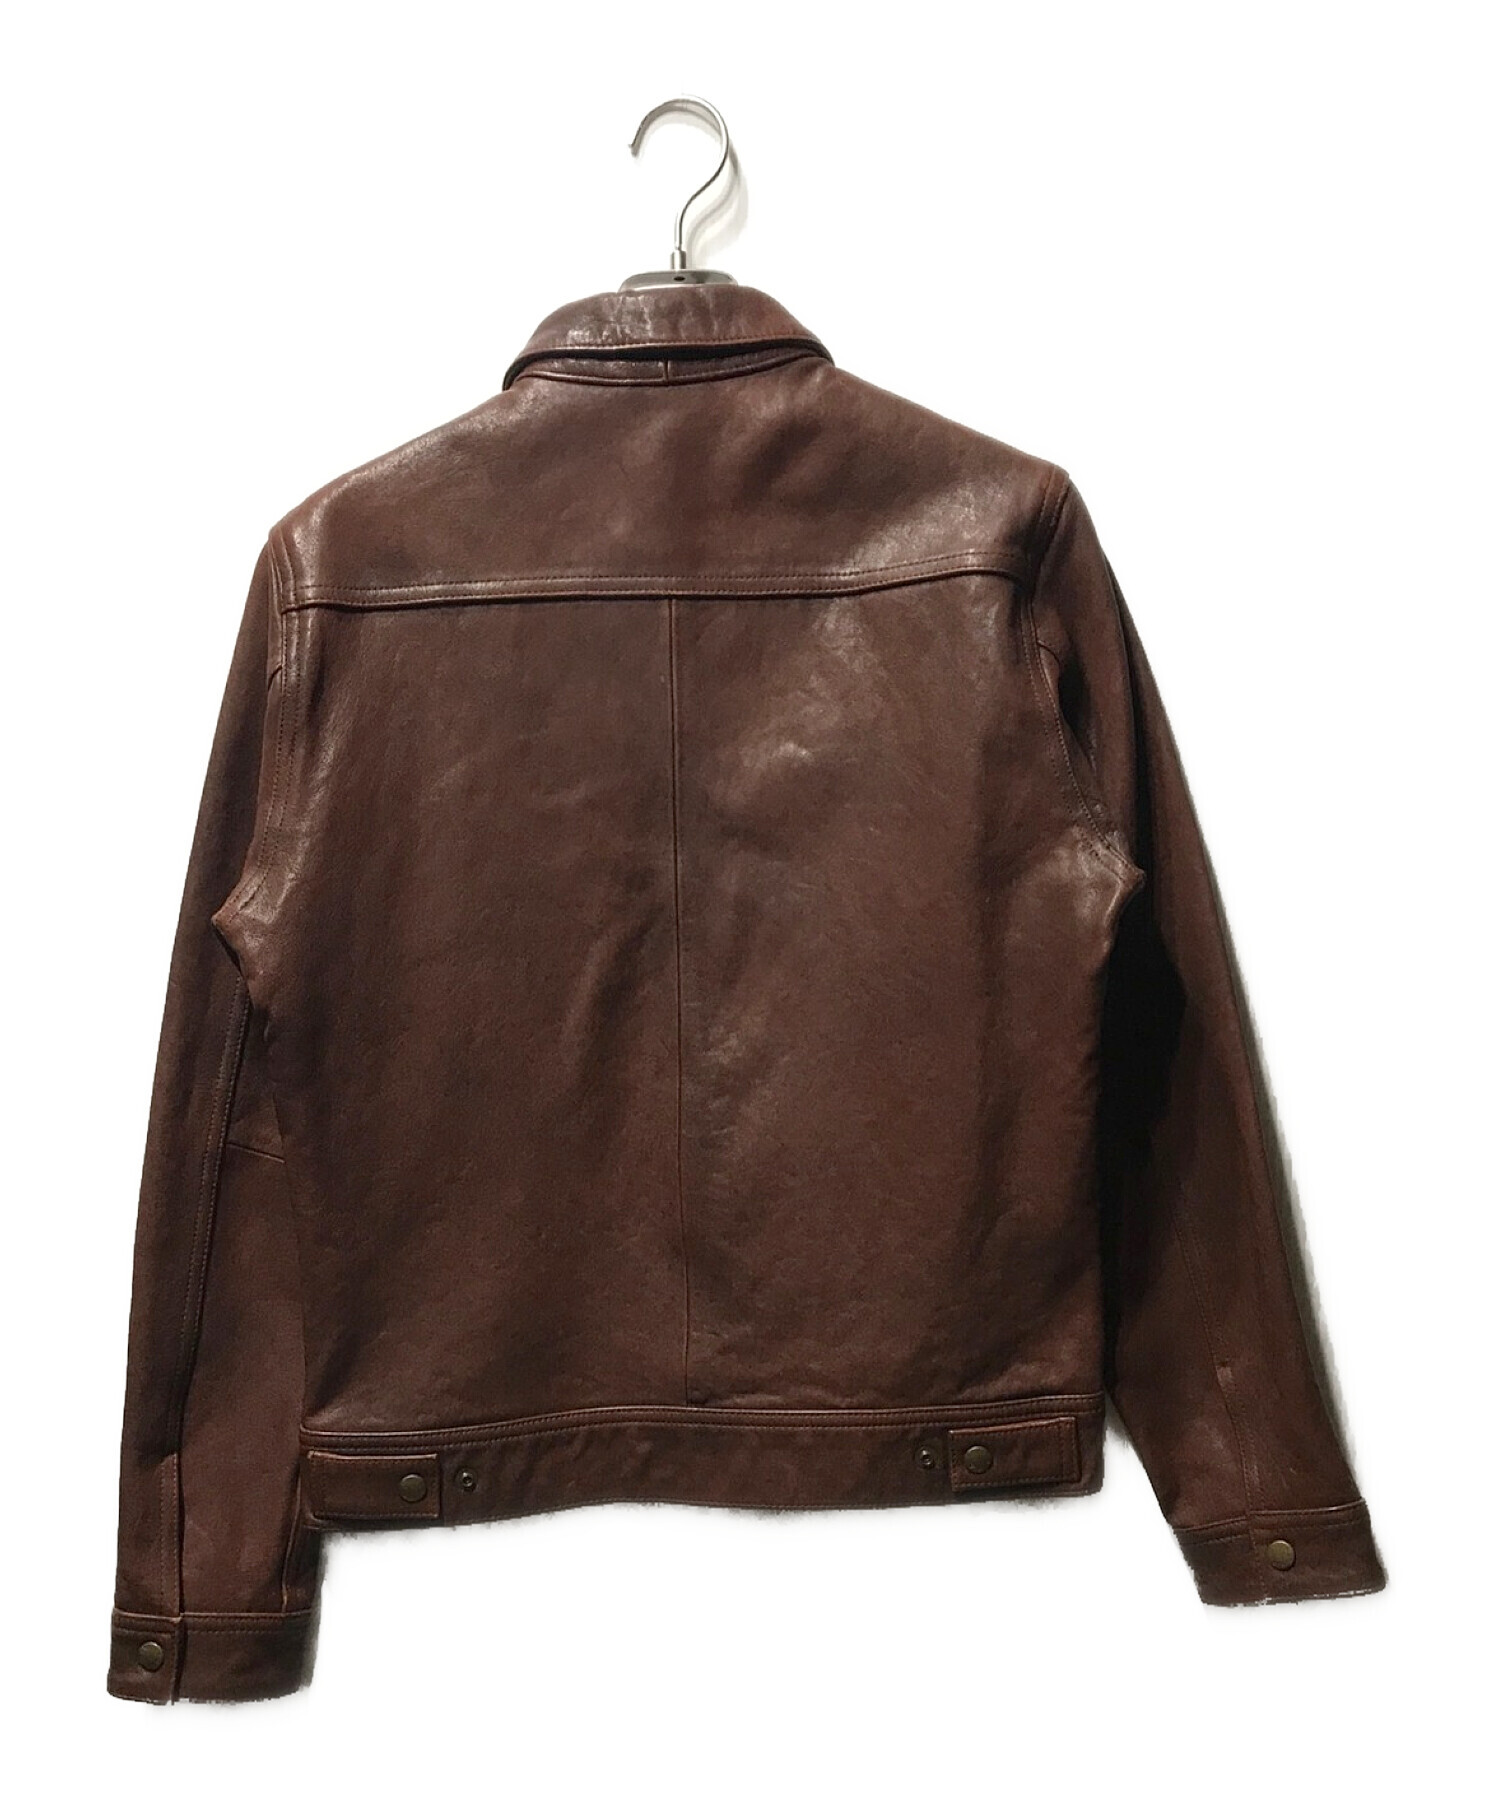 AVIREX OLD TIMES LEATHER WORK JACKET約53cm